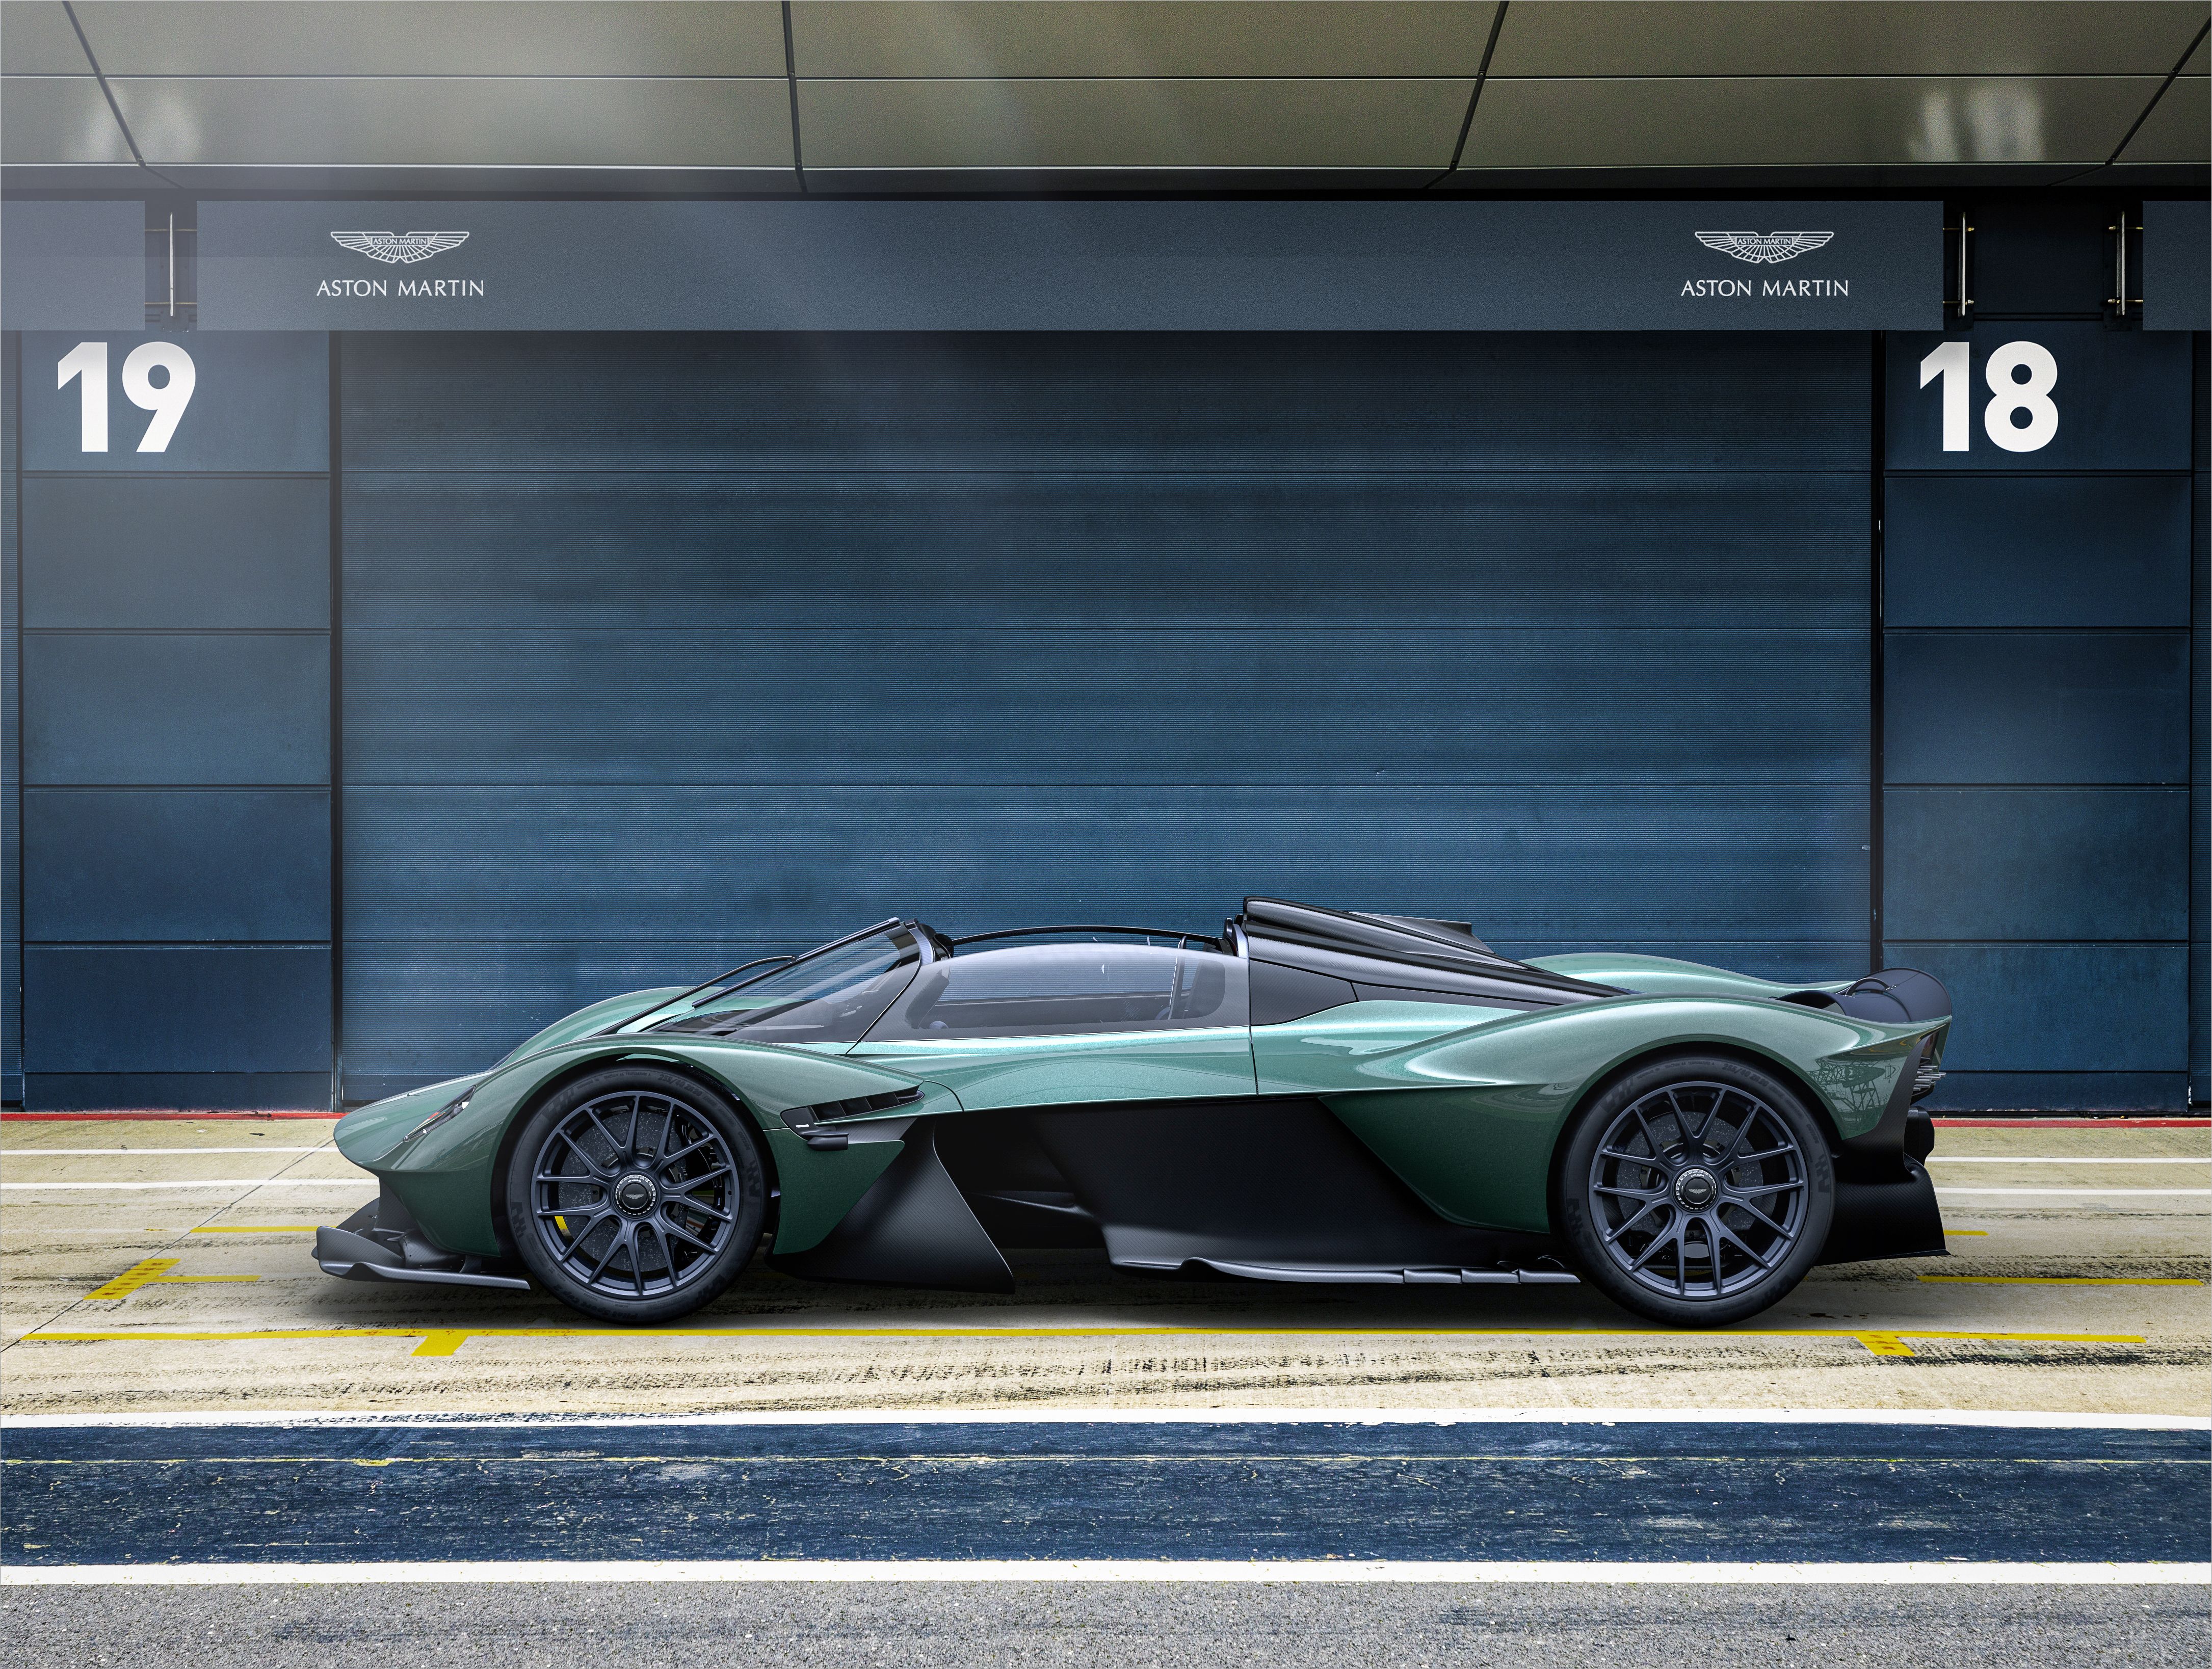 2021 Aston Martin Valkyrie Spider – A Valkyrie That Can Touch Speeds Of 205 mph With The Roof Off!